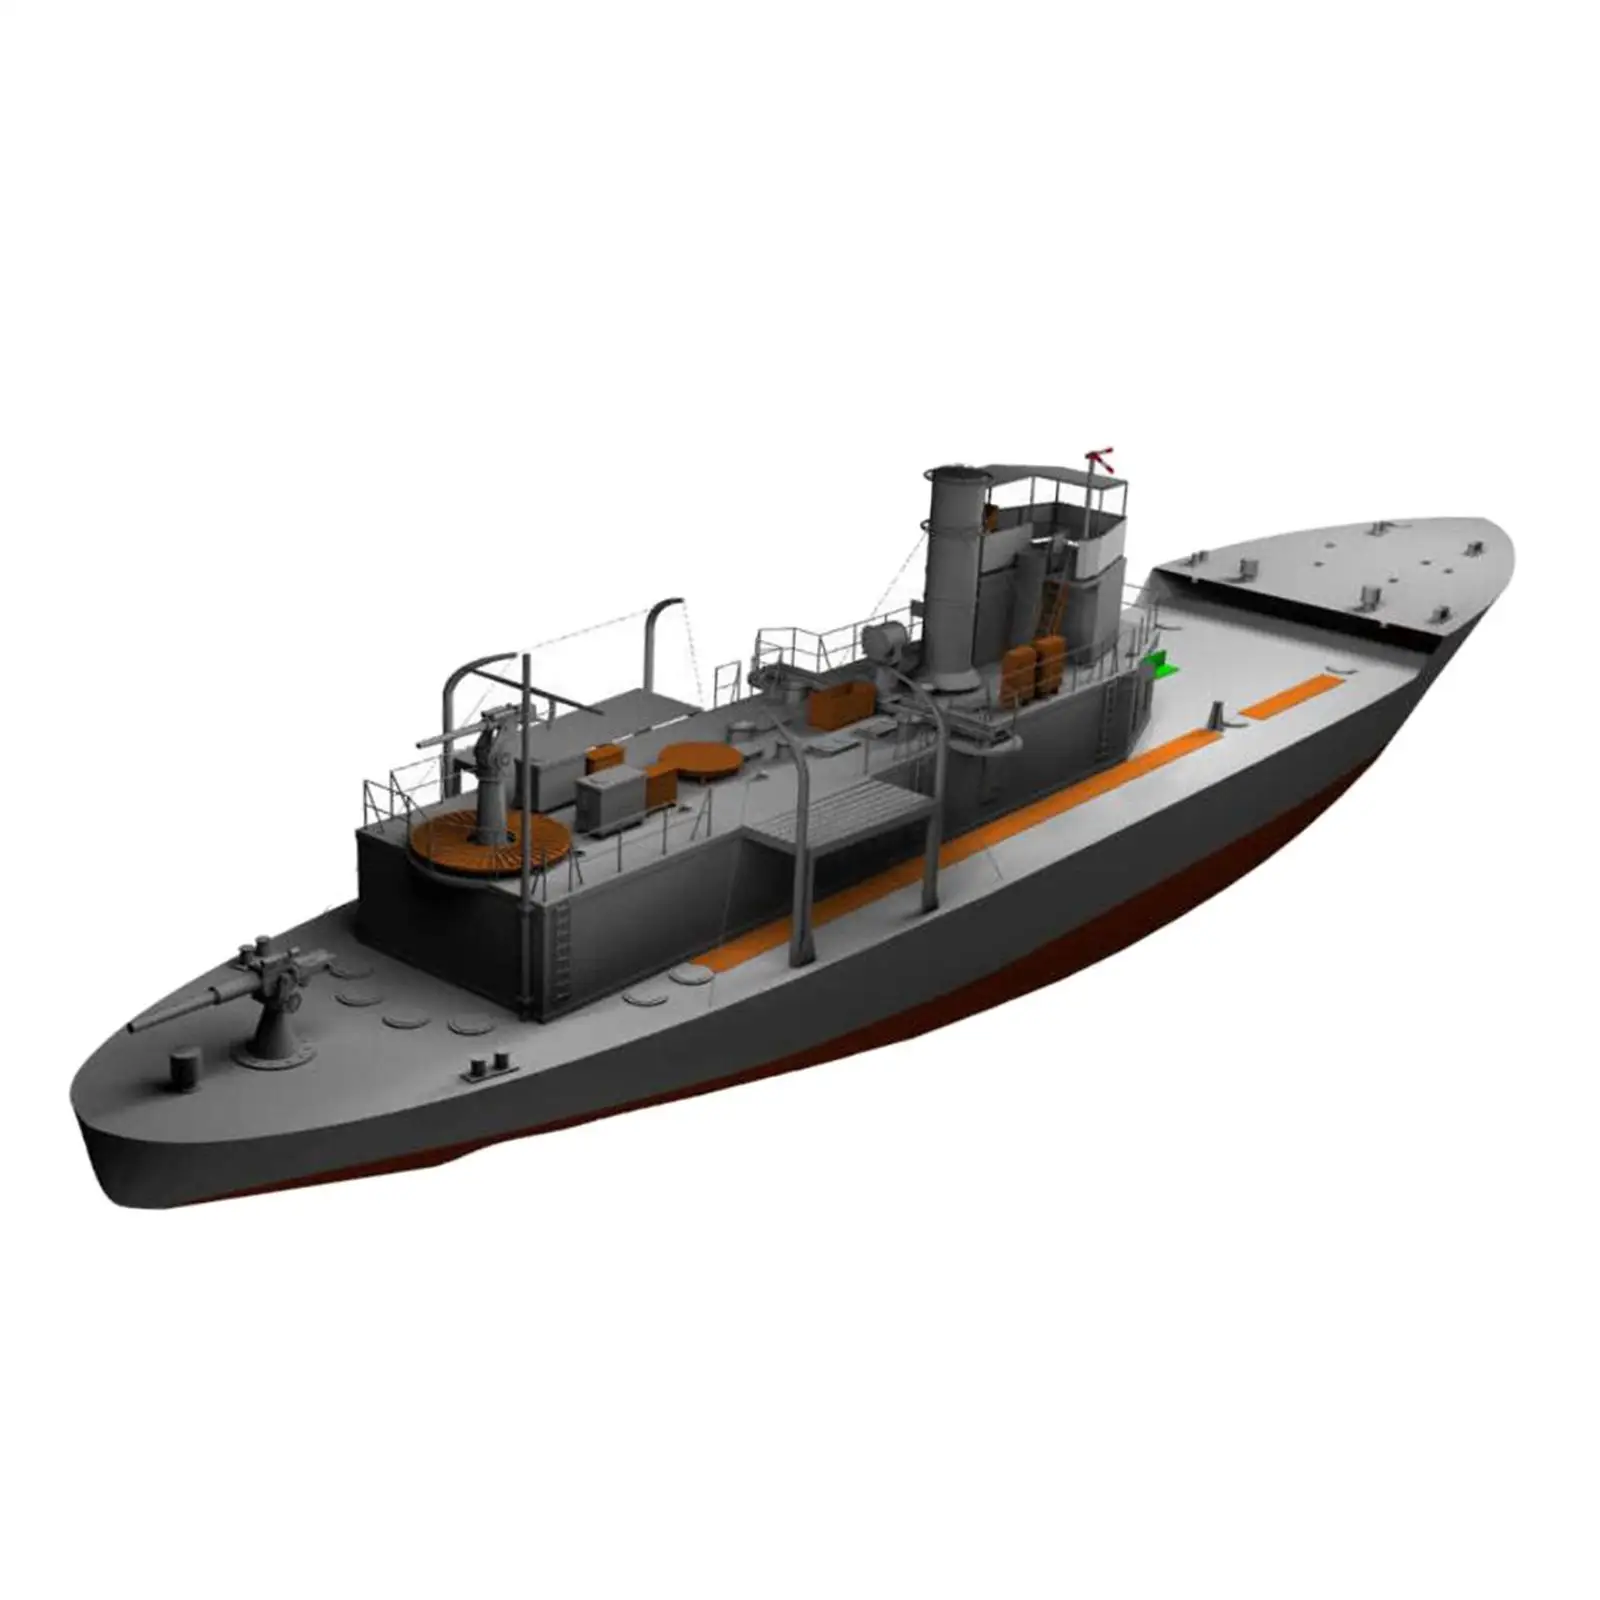 1/100 Patrol Boat Scale Model DIY Toys Papercraft for Boys Adults Children